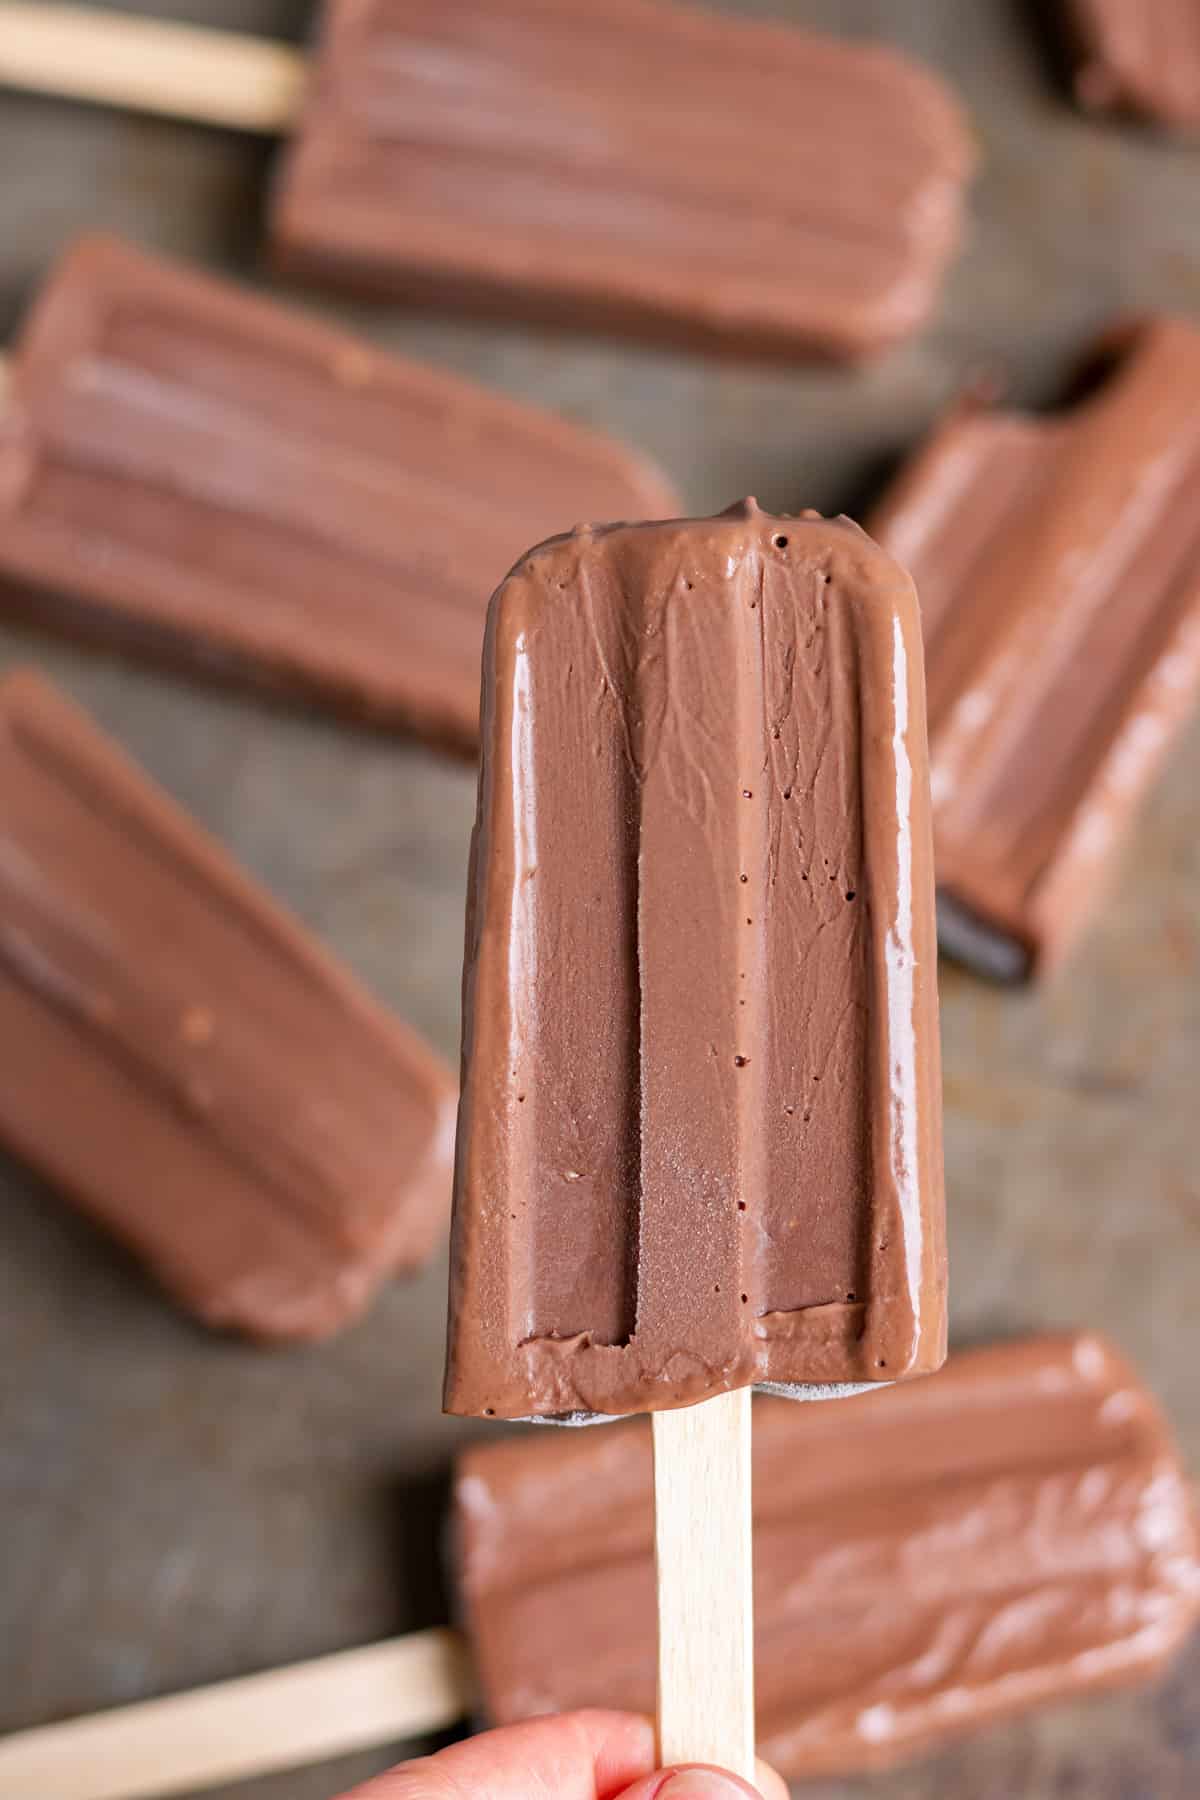 Holding up a chocolate fudgesicles.